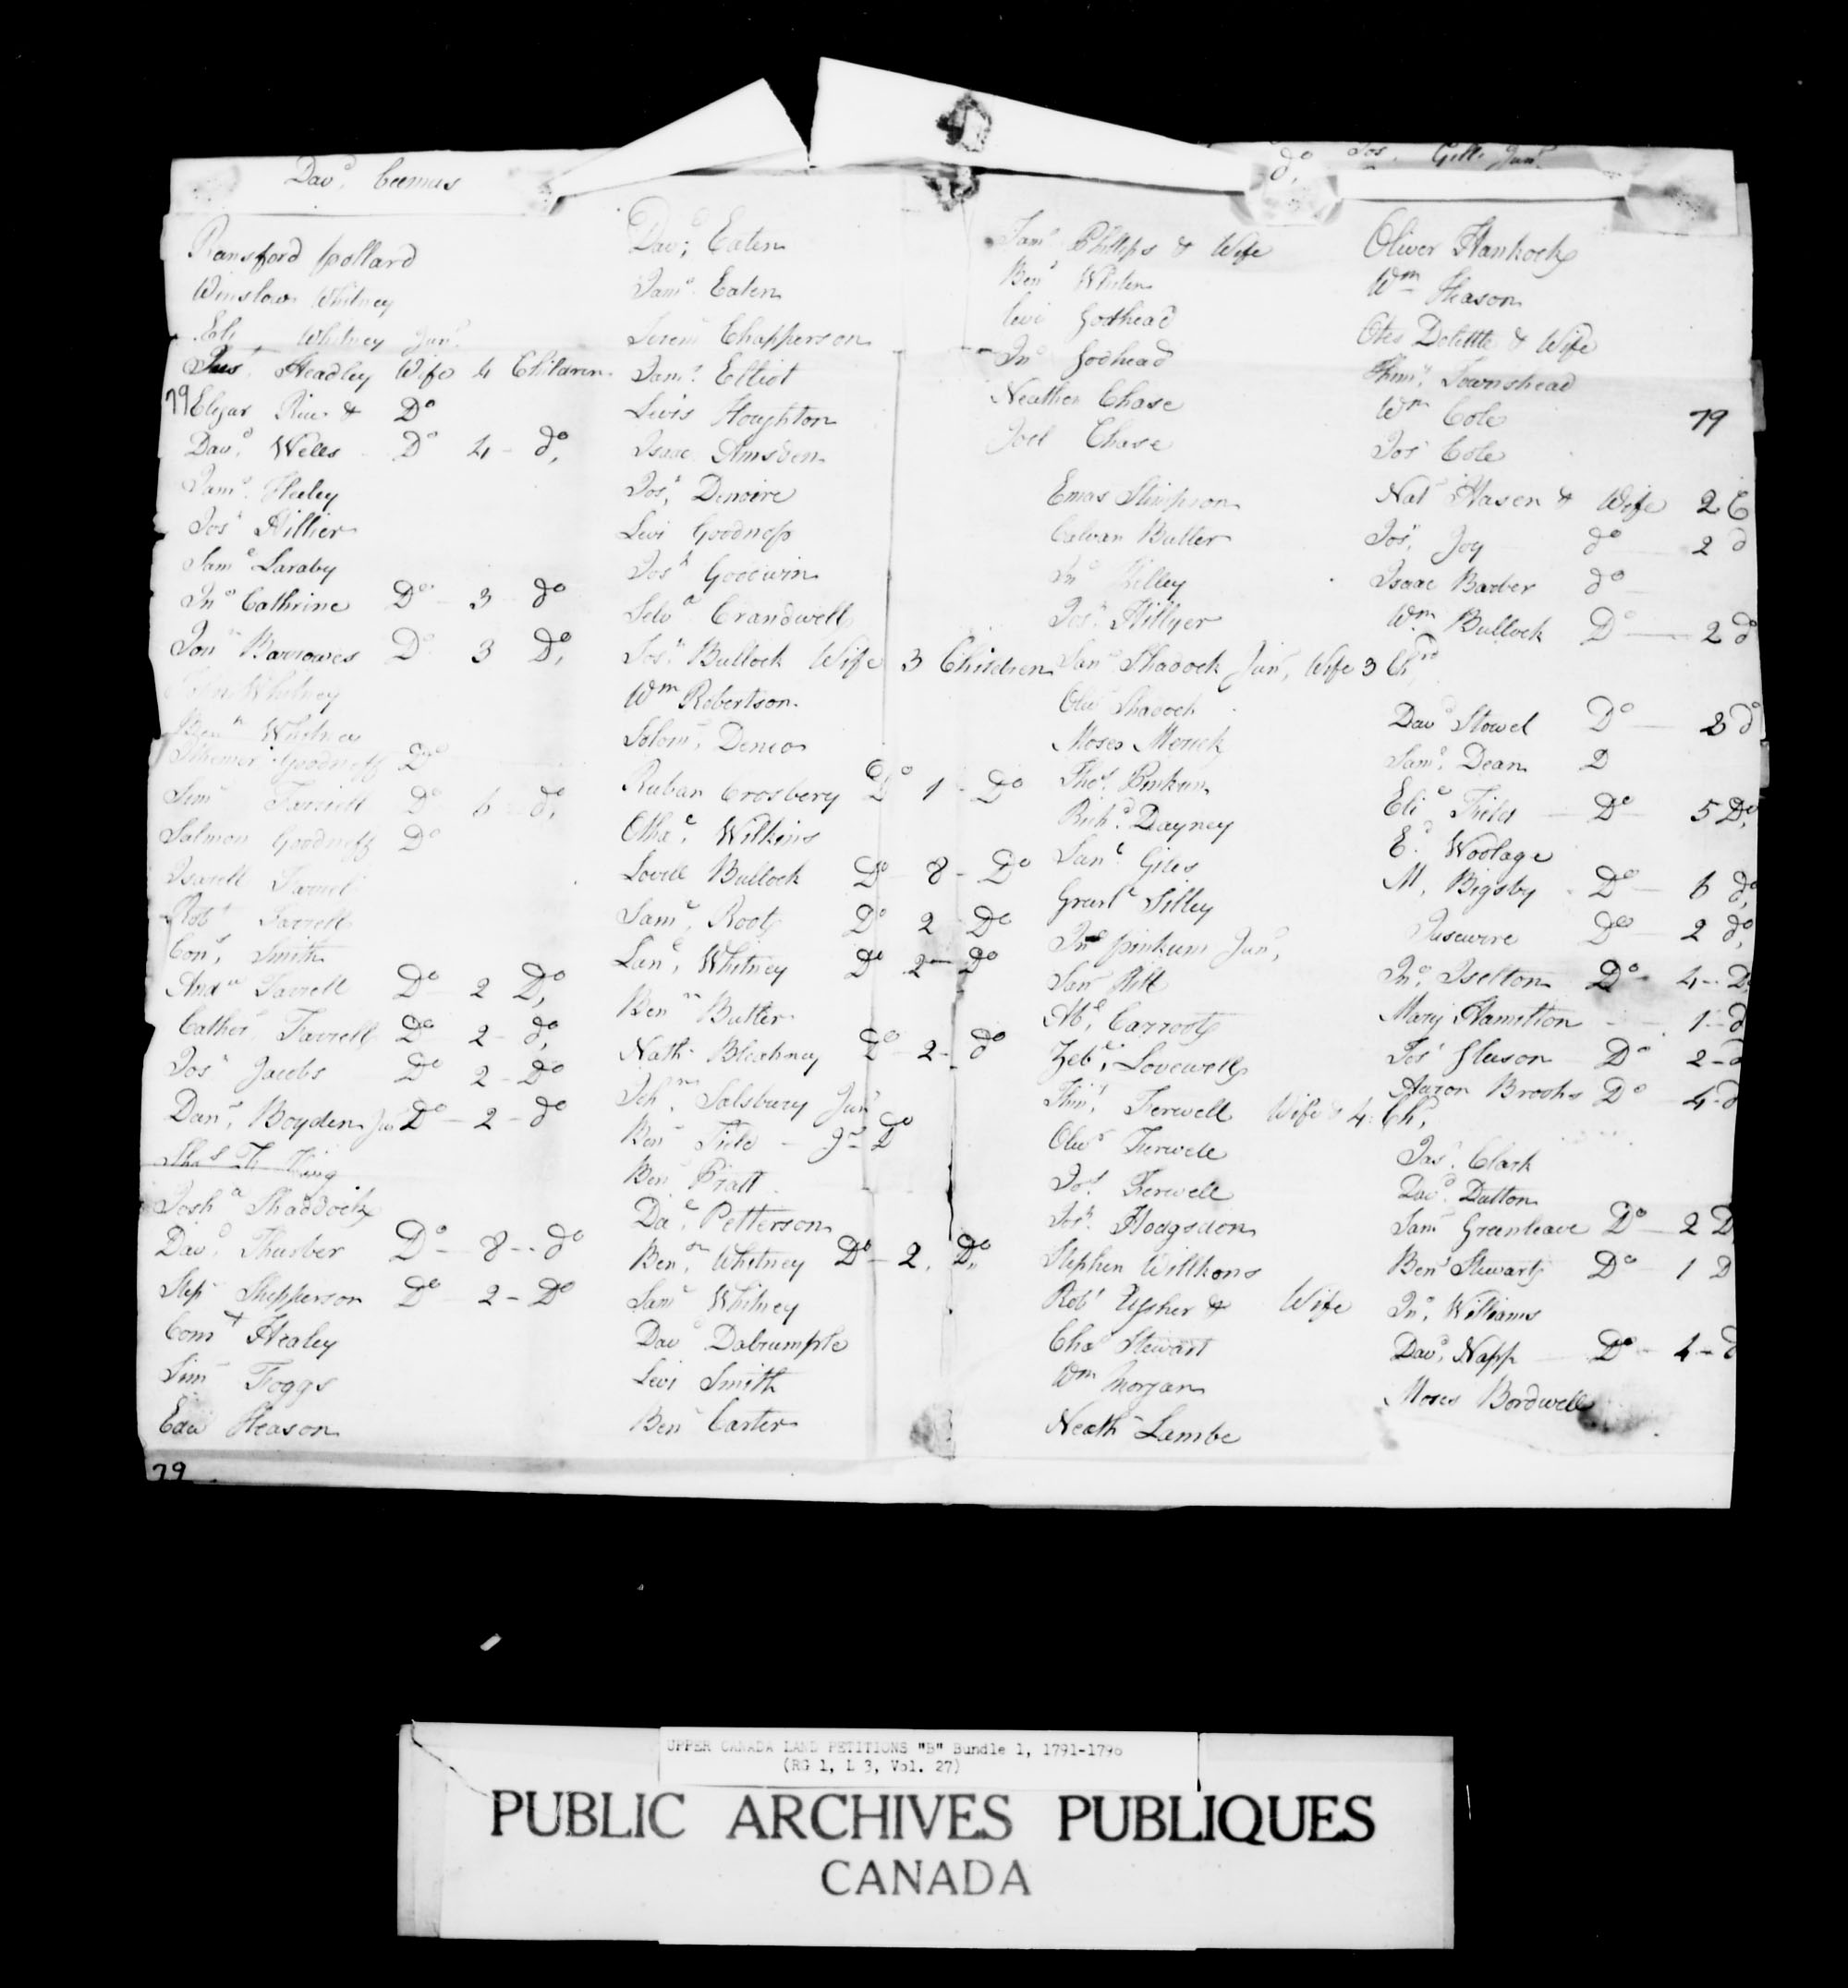 Title: Upper Canada Land Petitions (1763-1865) - Mikan Number: 205131 - Microform: c-1619